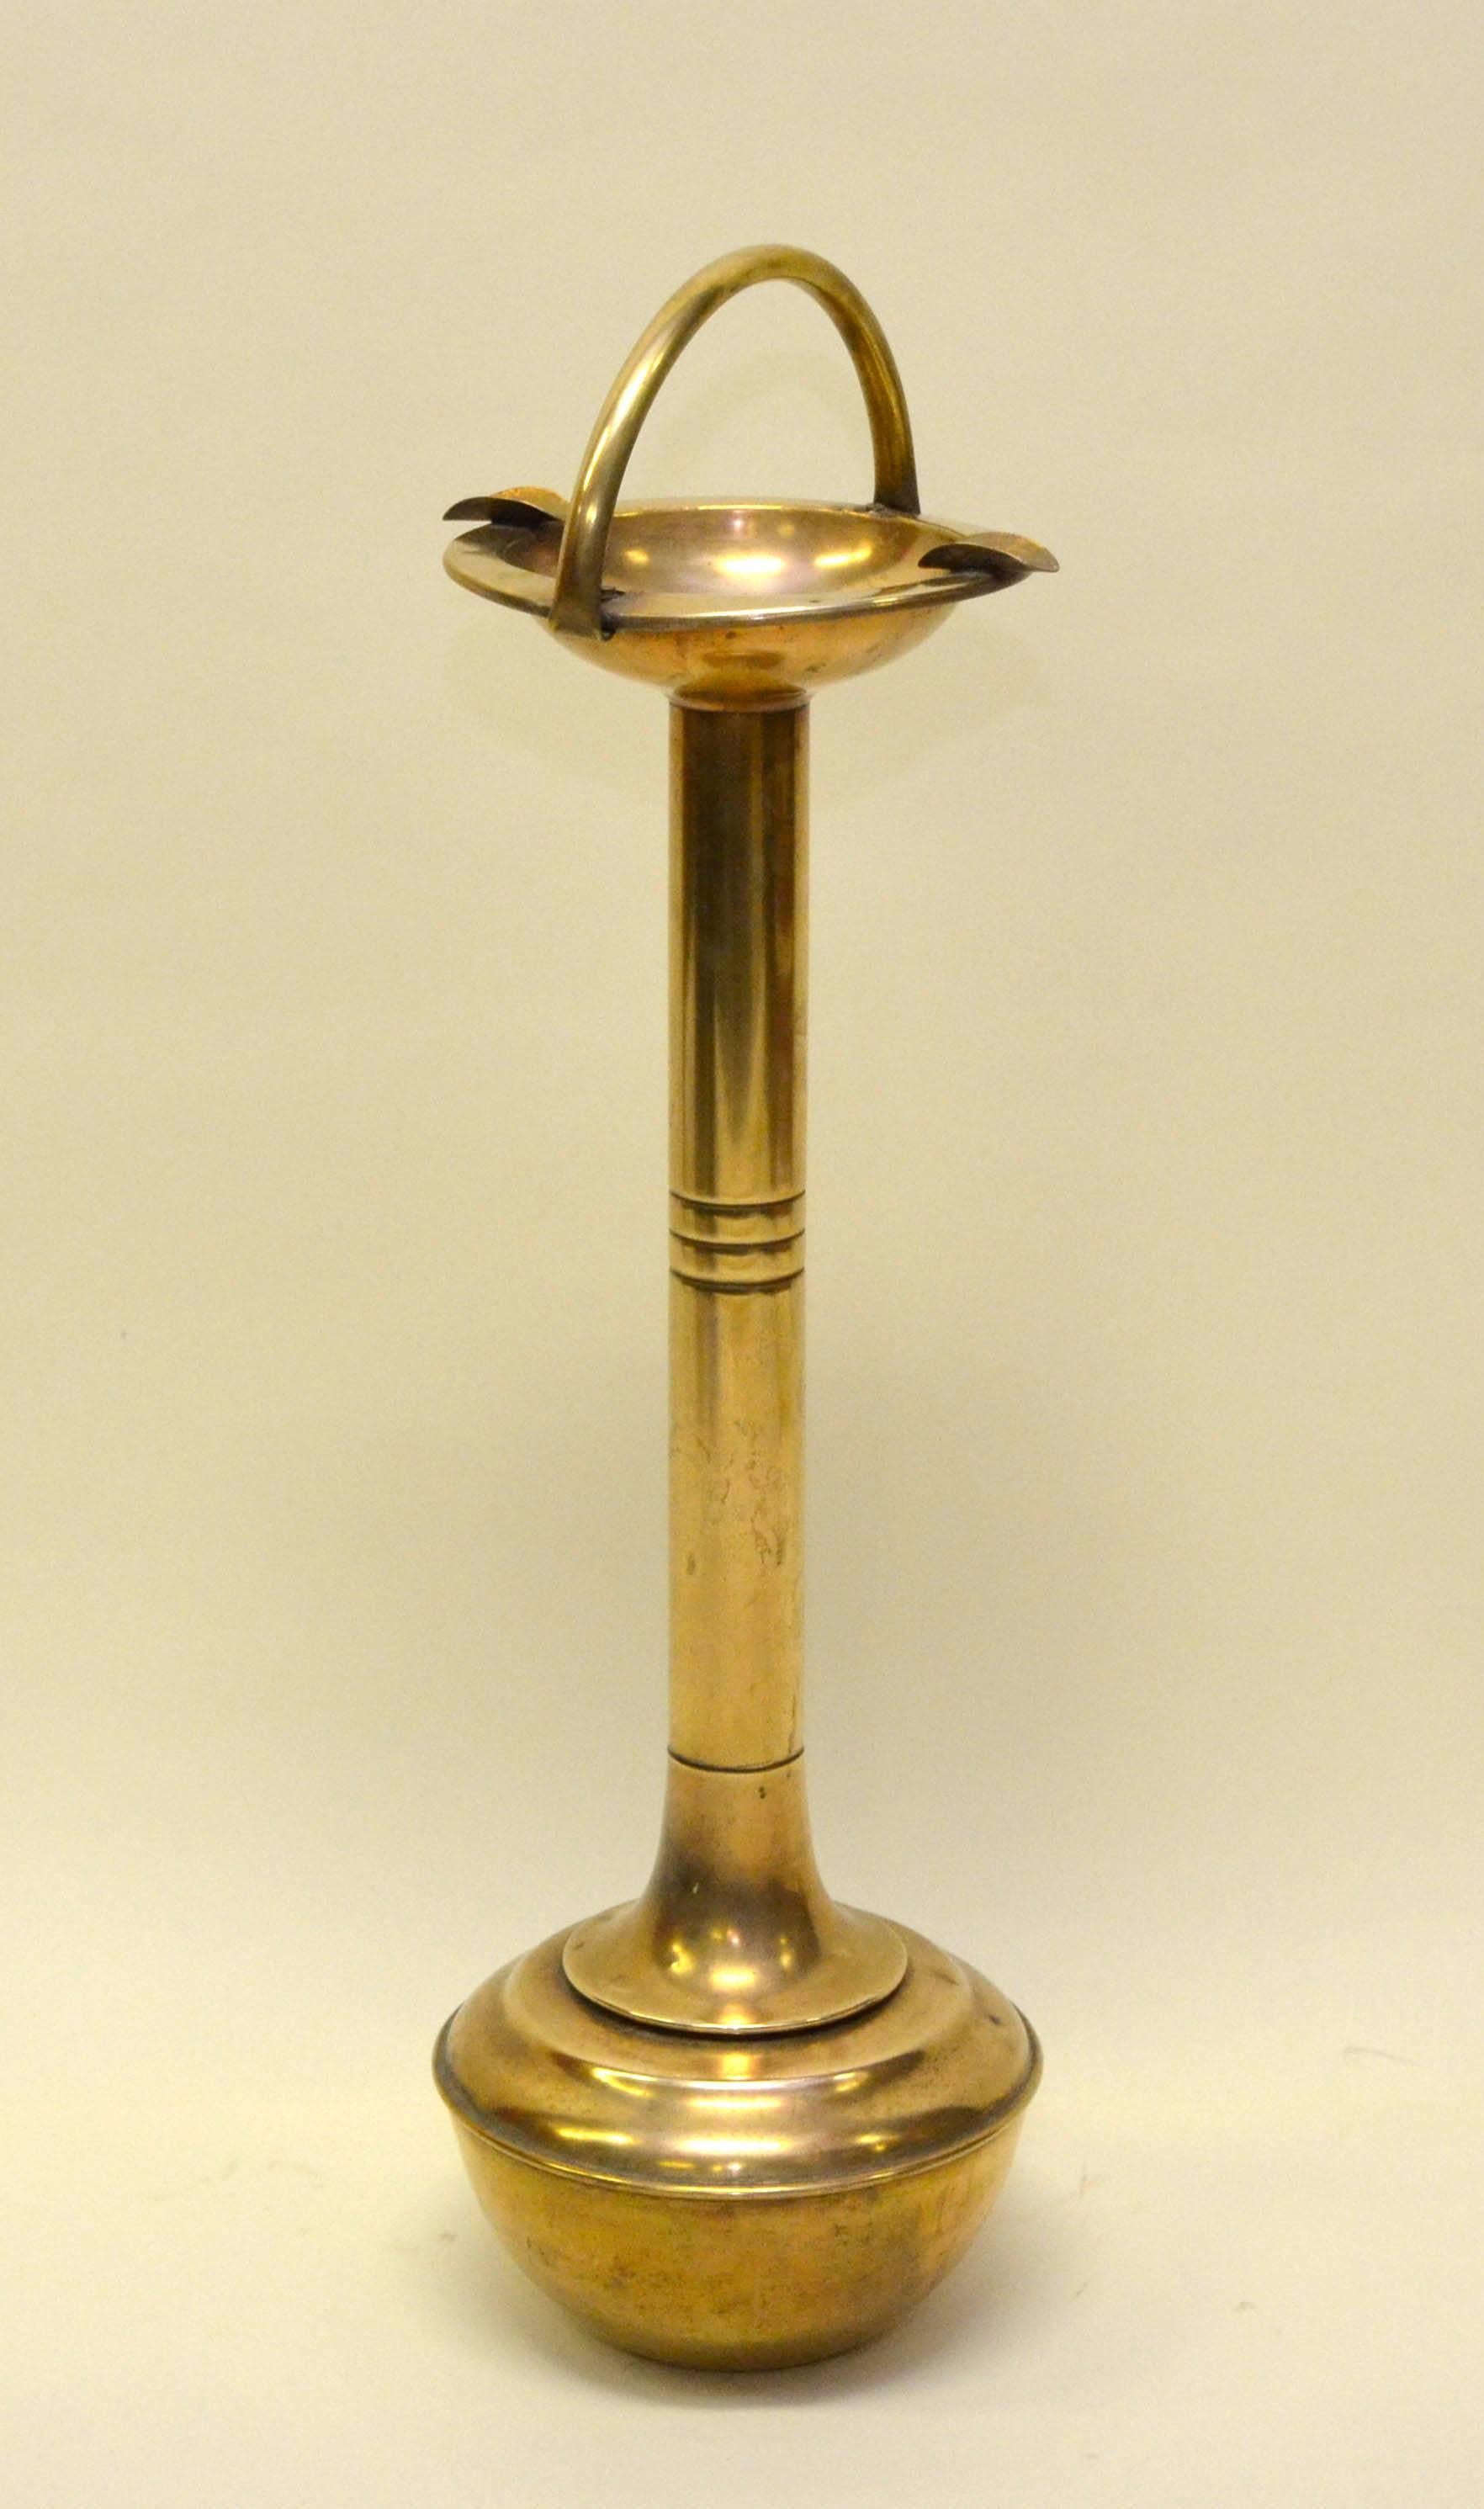 Probably English tall brass ashtray with bounce back base.
The base can be spinned around but never allows the ash to fell out from the tray.